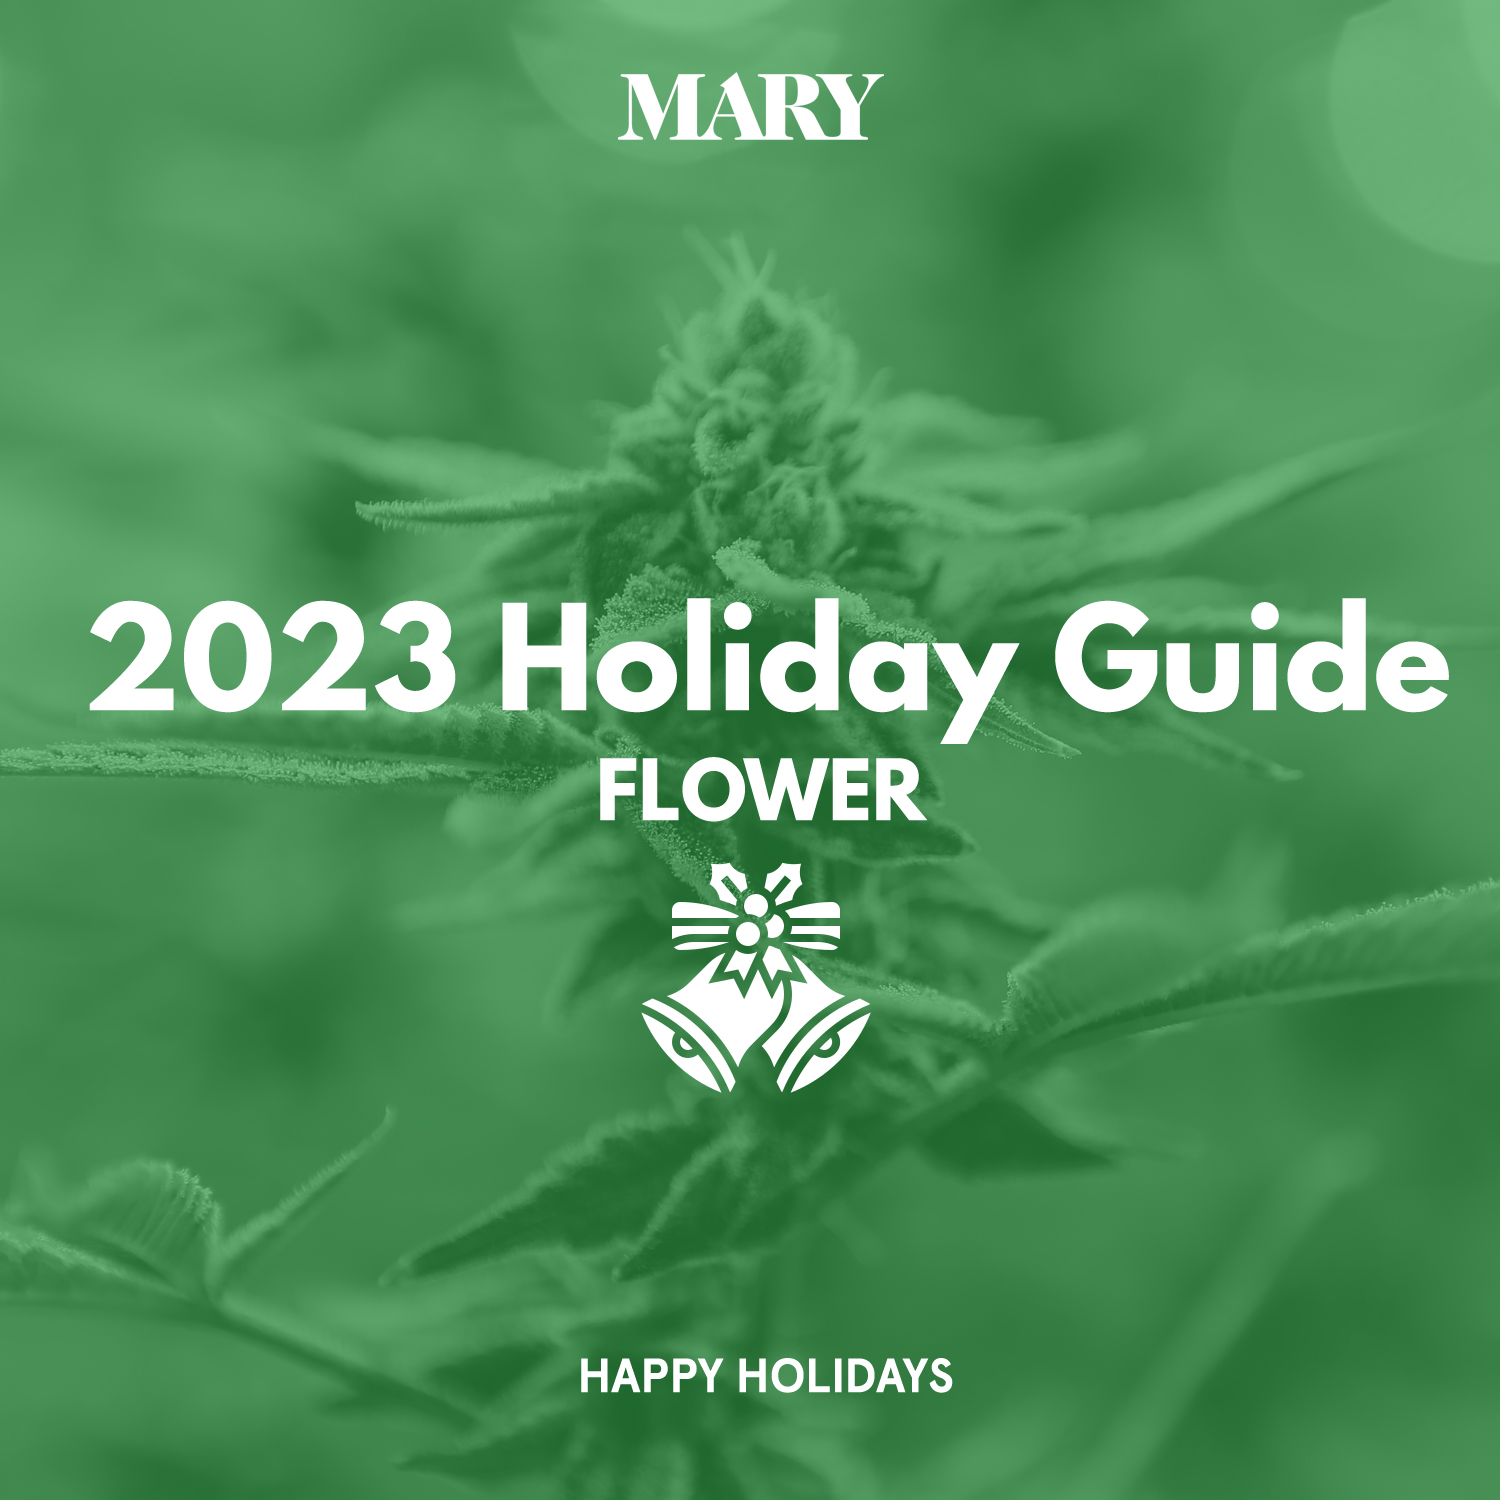 2023 Holiday Guide Flower